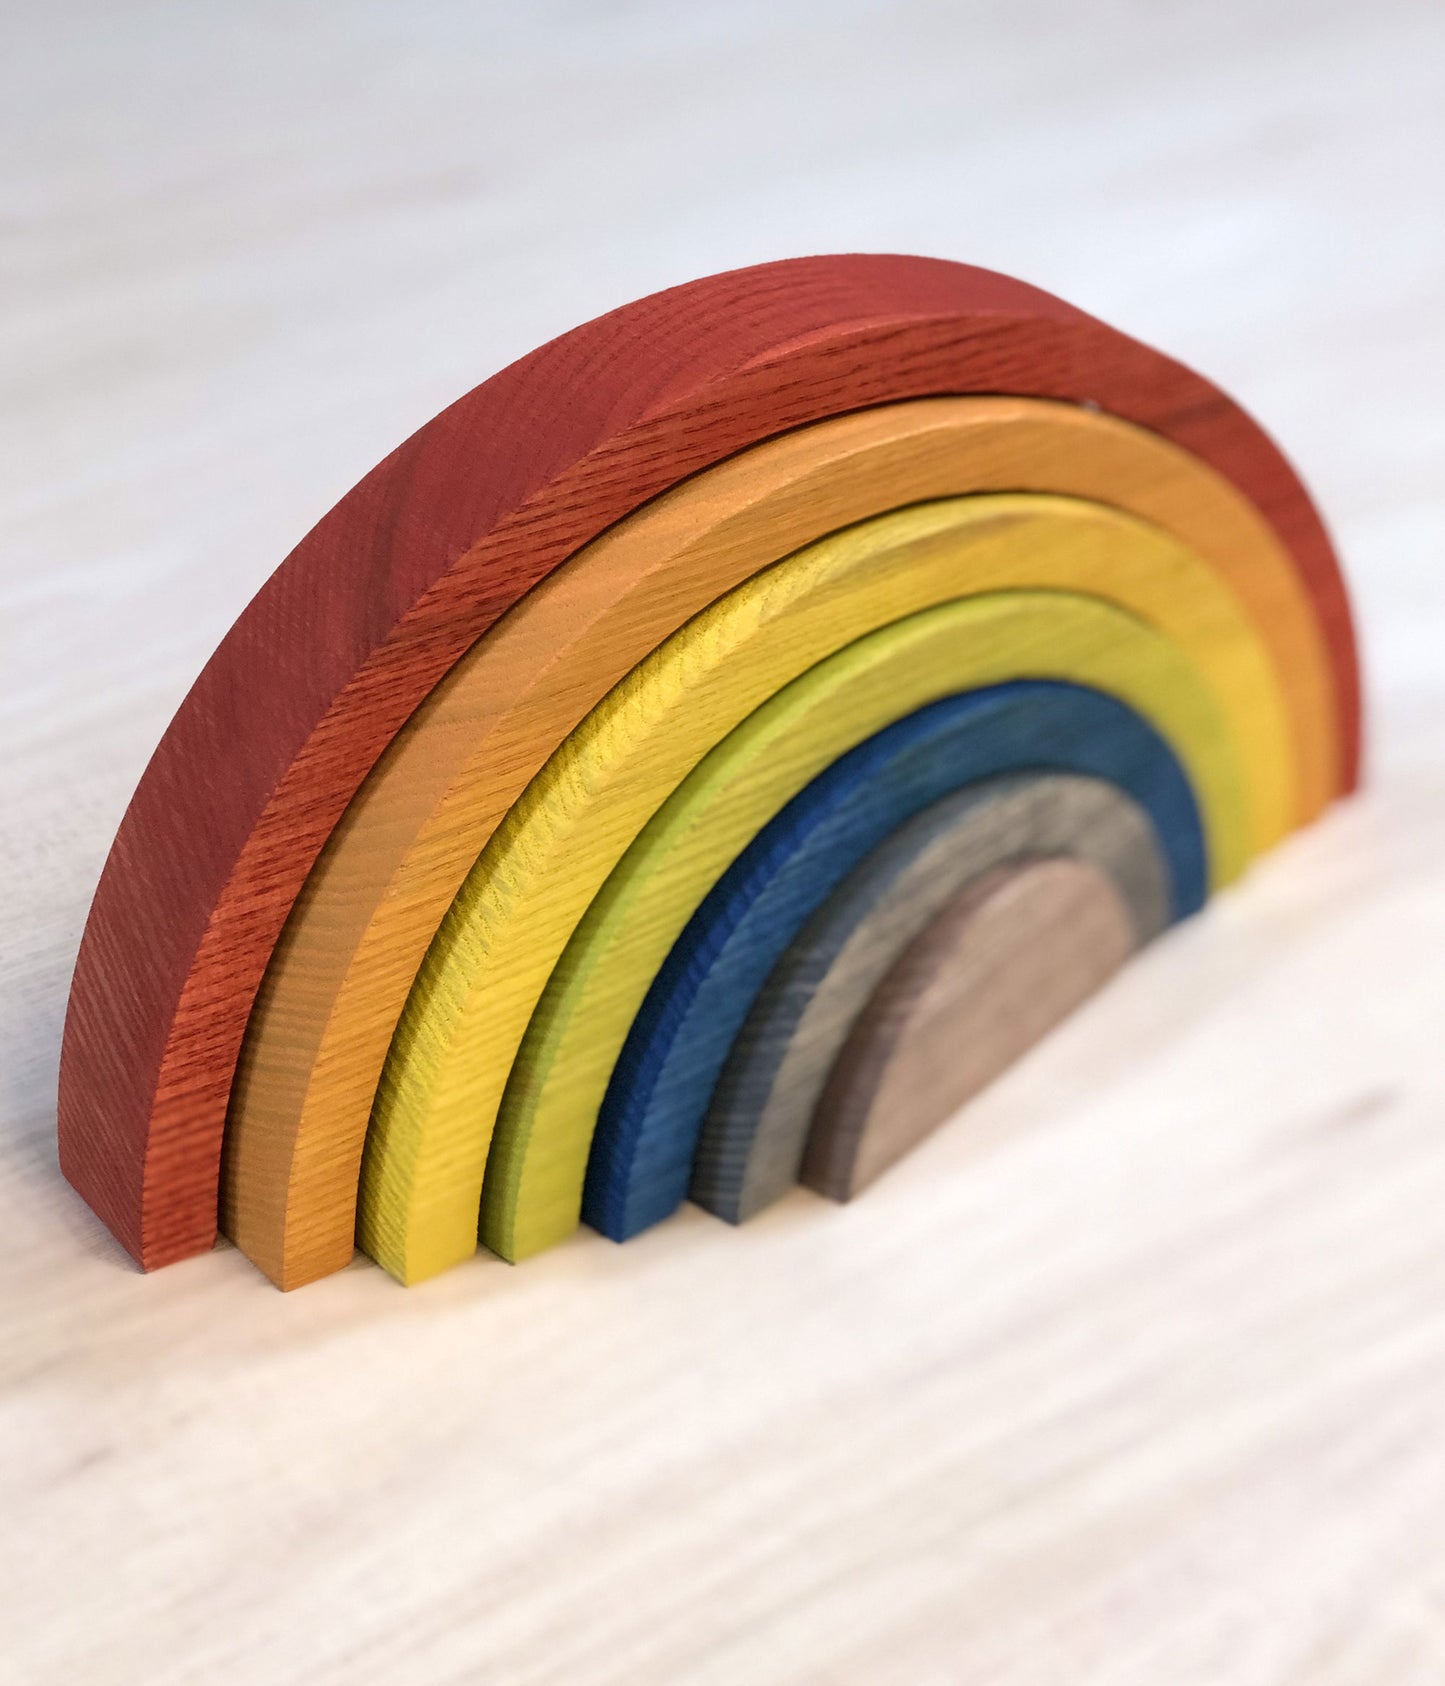 Make a solid wood rainbow at home with this woodworking kit for kids and adults